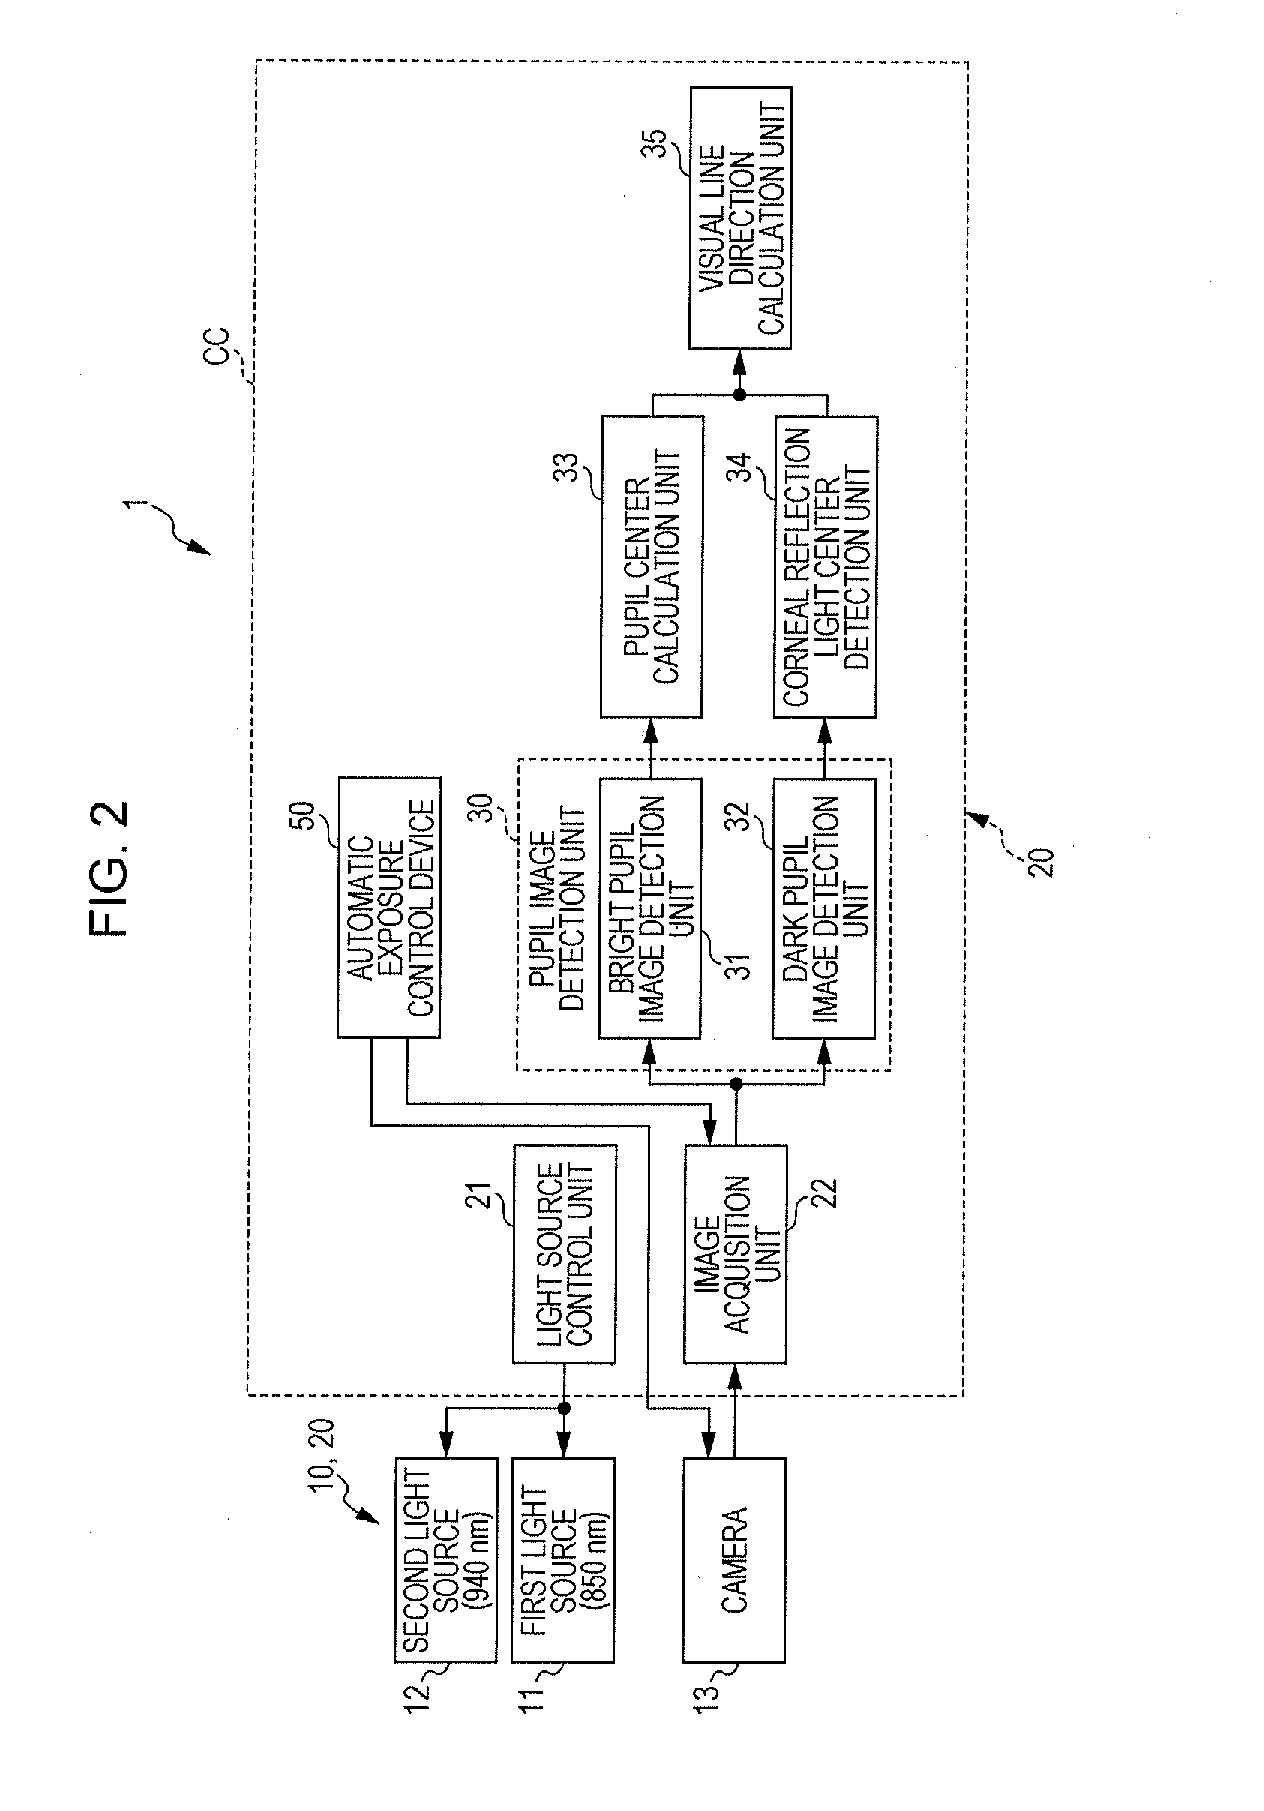 In-vehicle imaging device